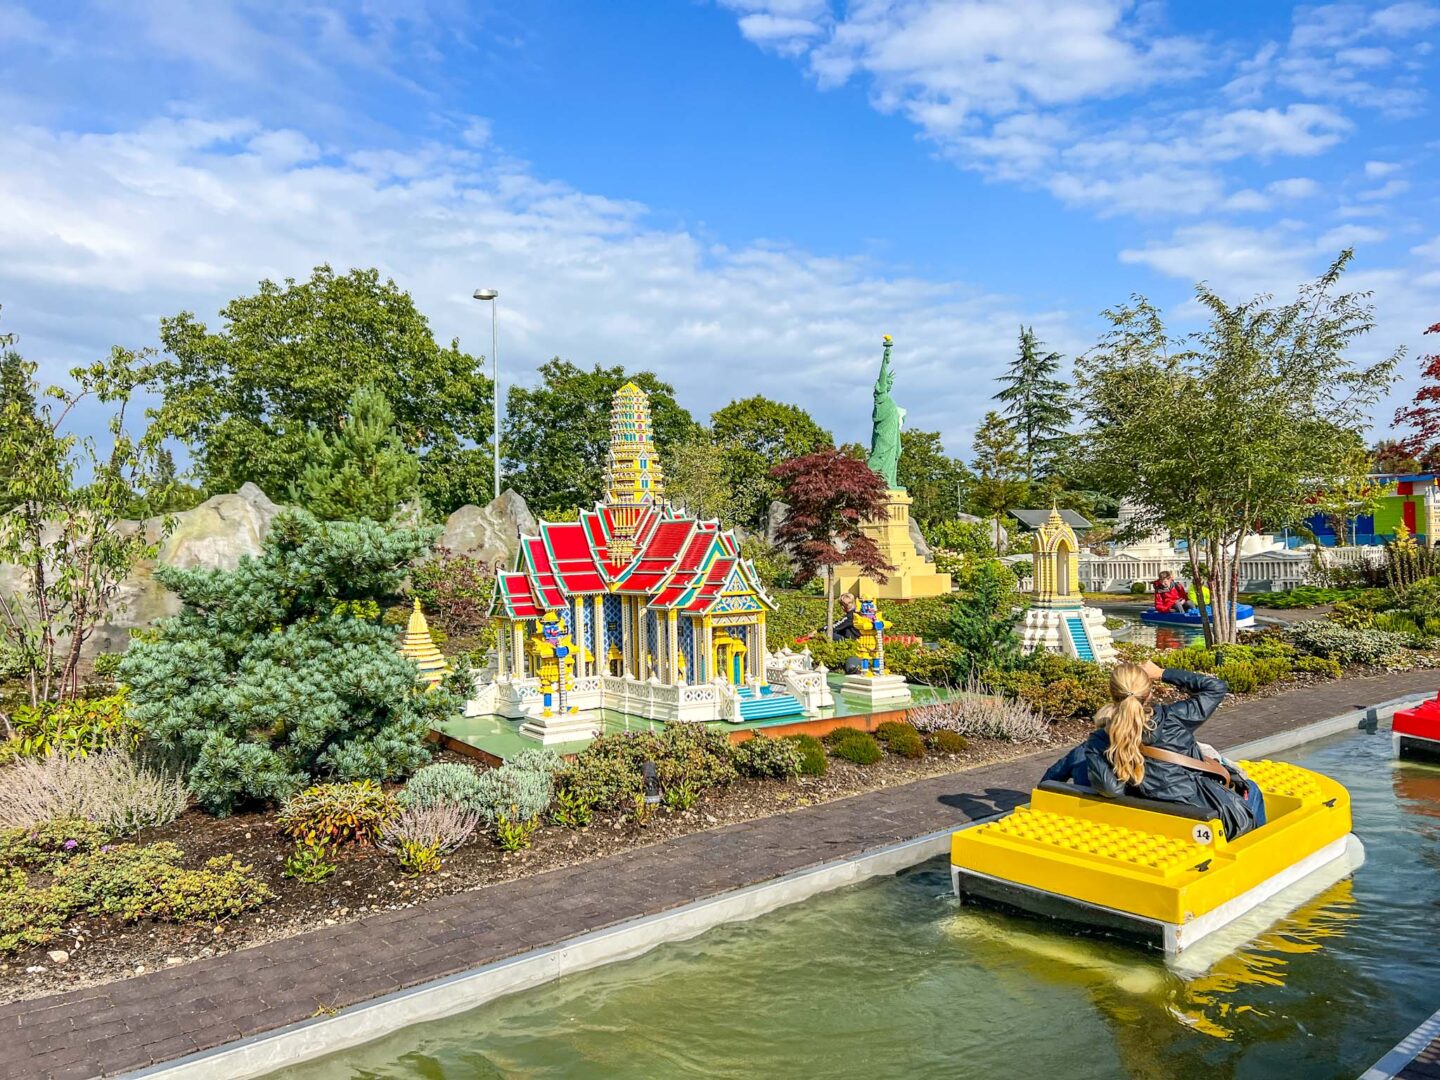 How to Plan a Trip to LEGOLAND Billund in Denmark! Hotels, Passes, Things To Do!